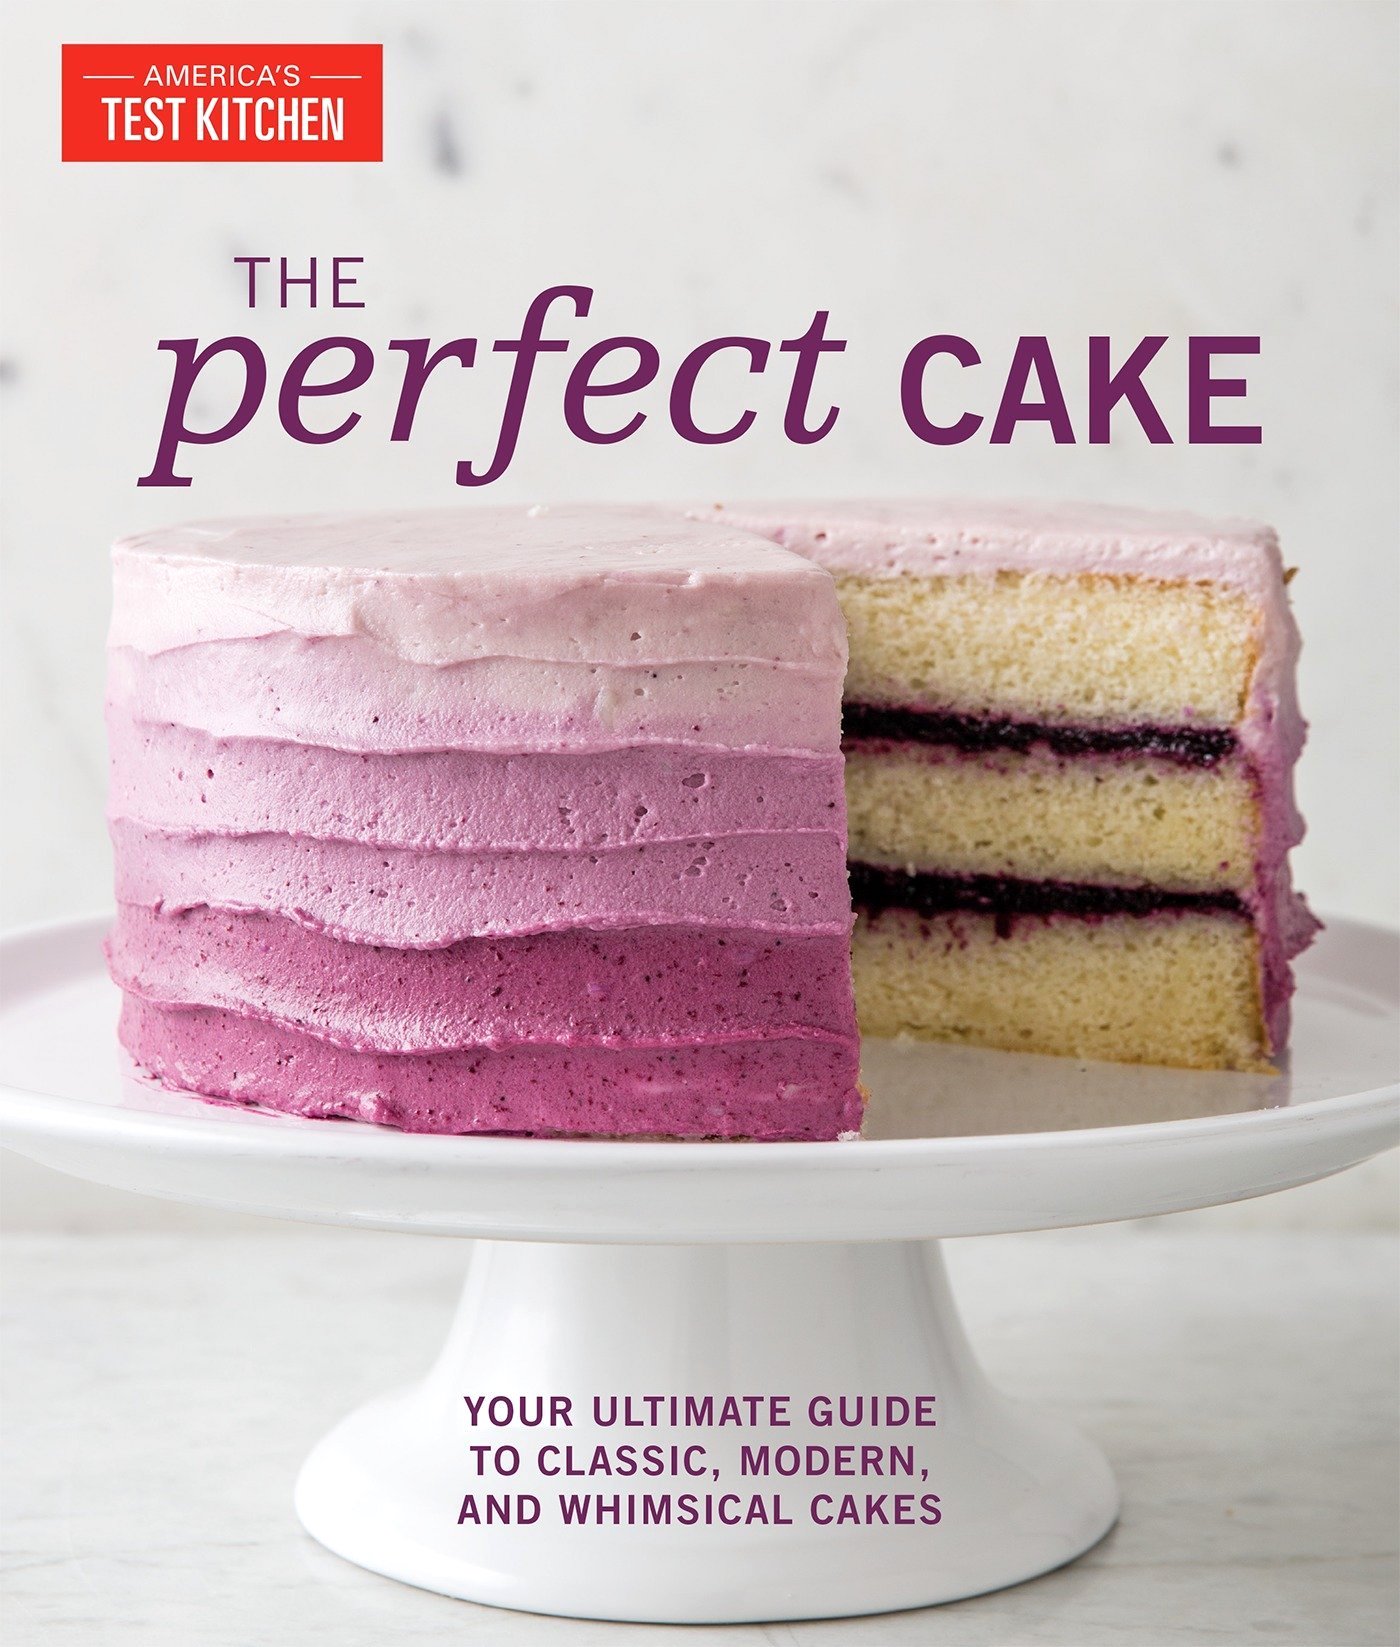 "The Perfect Cake: Your Ultimate Guide to Classic, Modern, and Ultimate Cakes"